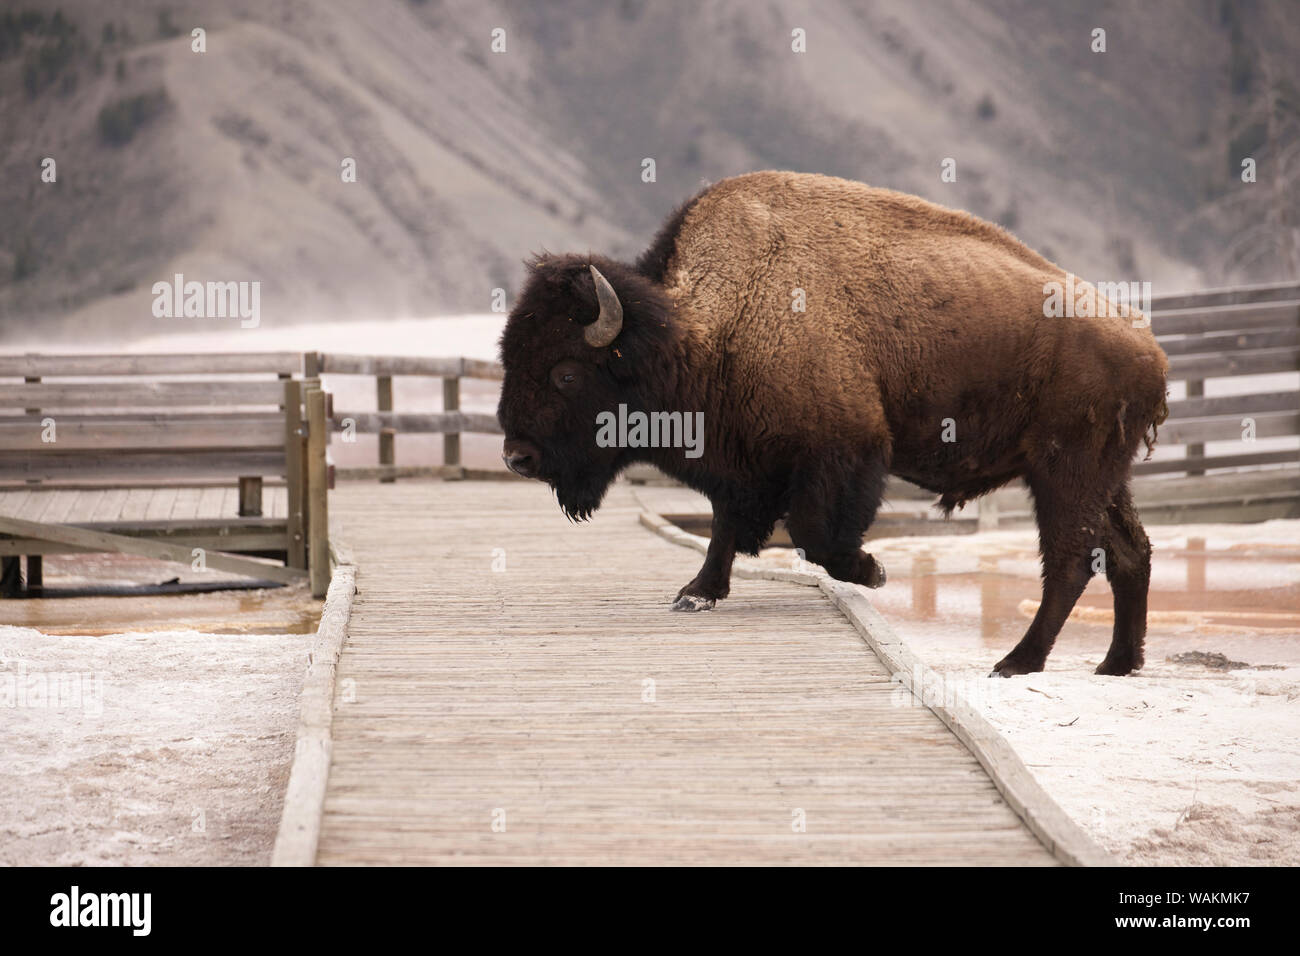 Yellowstone National Park, Wyoming, USA. Bison climbing on boardwalk in calcium carbonate deposits in Mammoth Hot Springs. Stock Photo